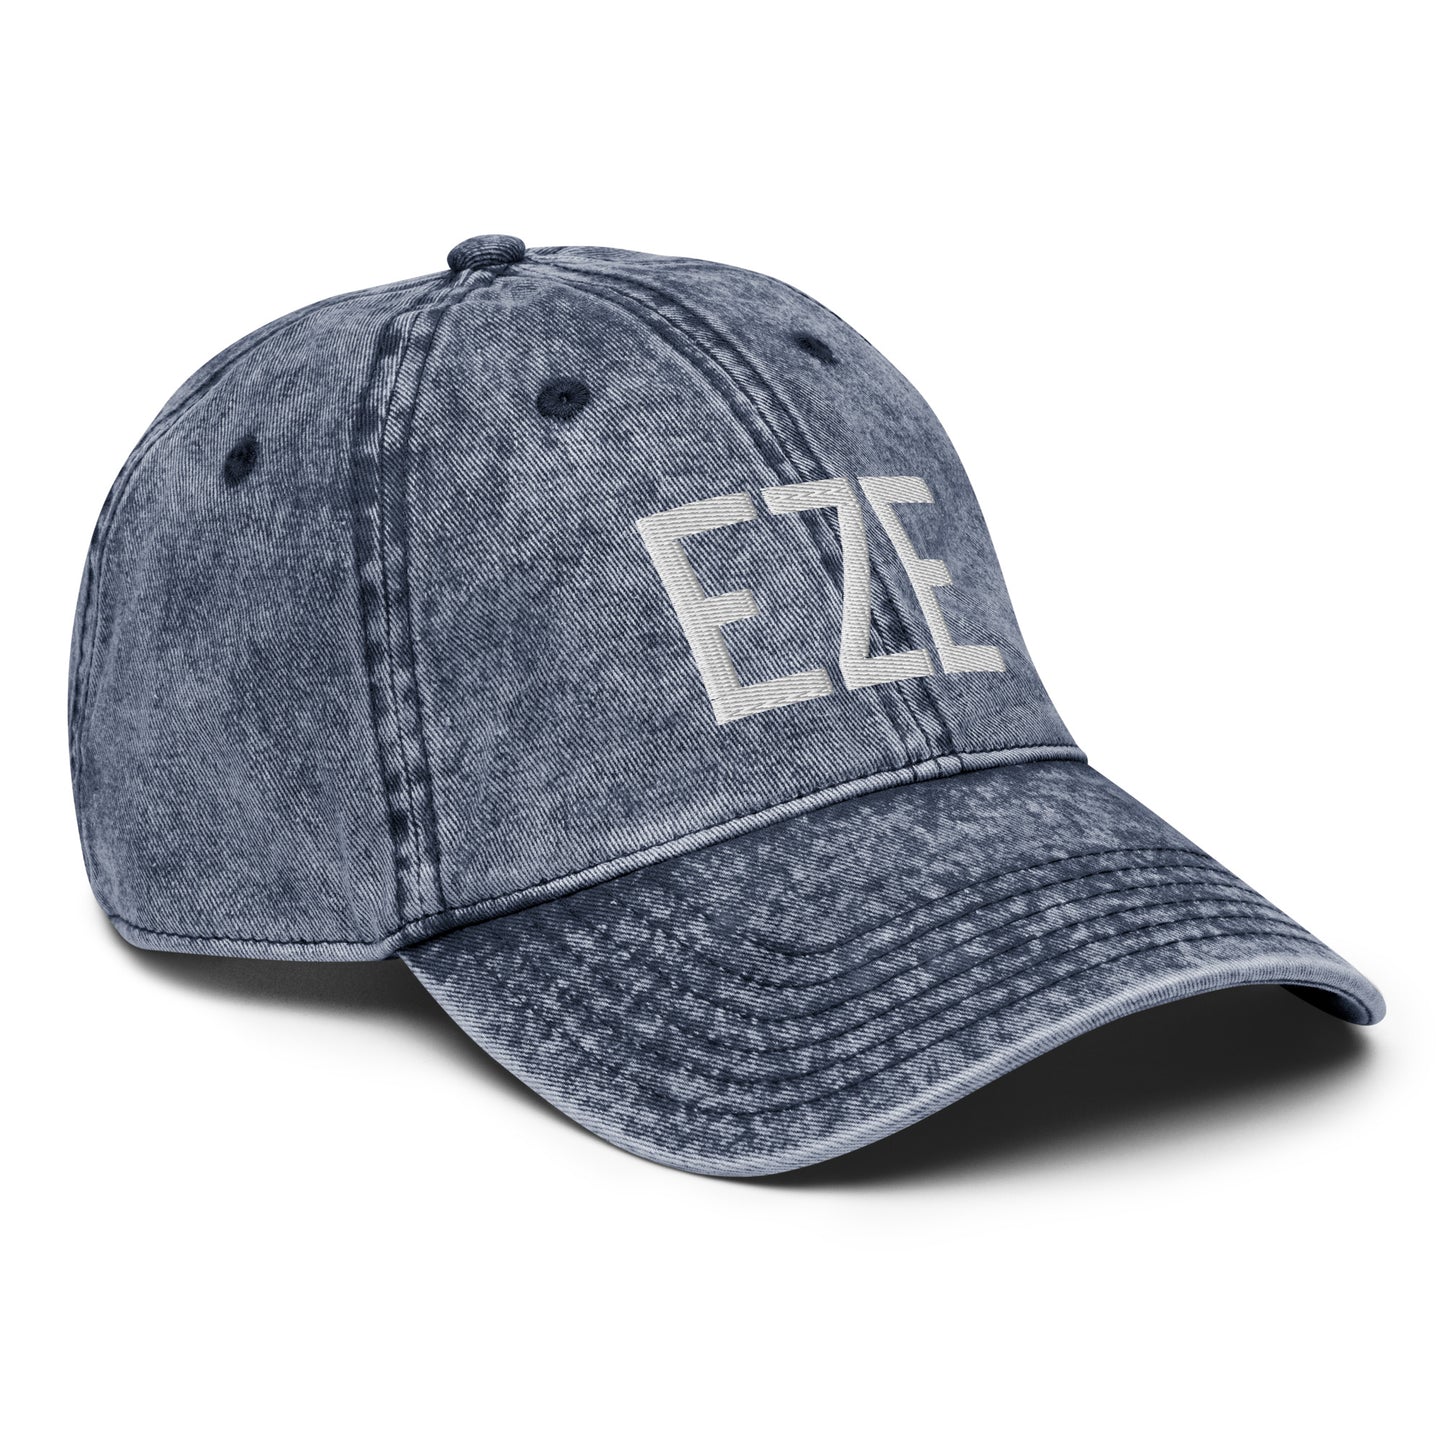 Airport Code Twill Cap - White • EZE Buenos Aires • YHM Designs - Image 18